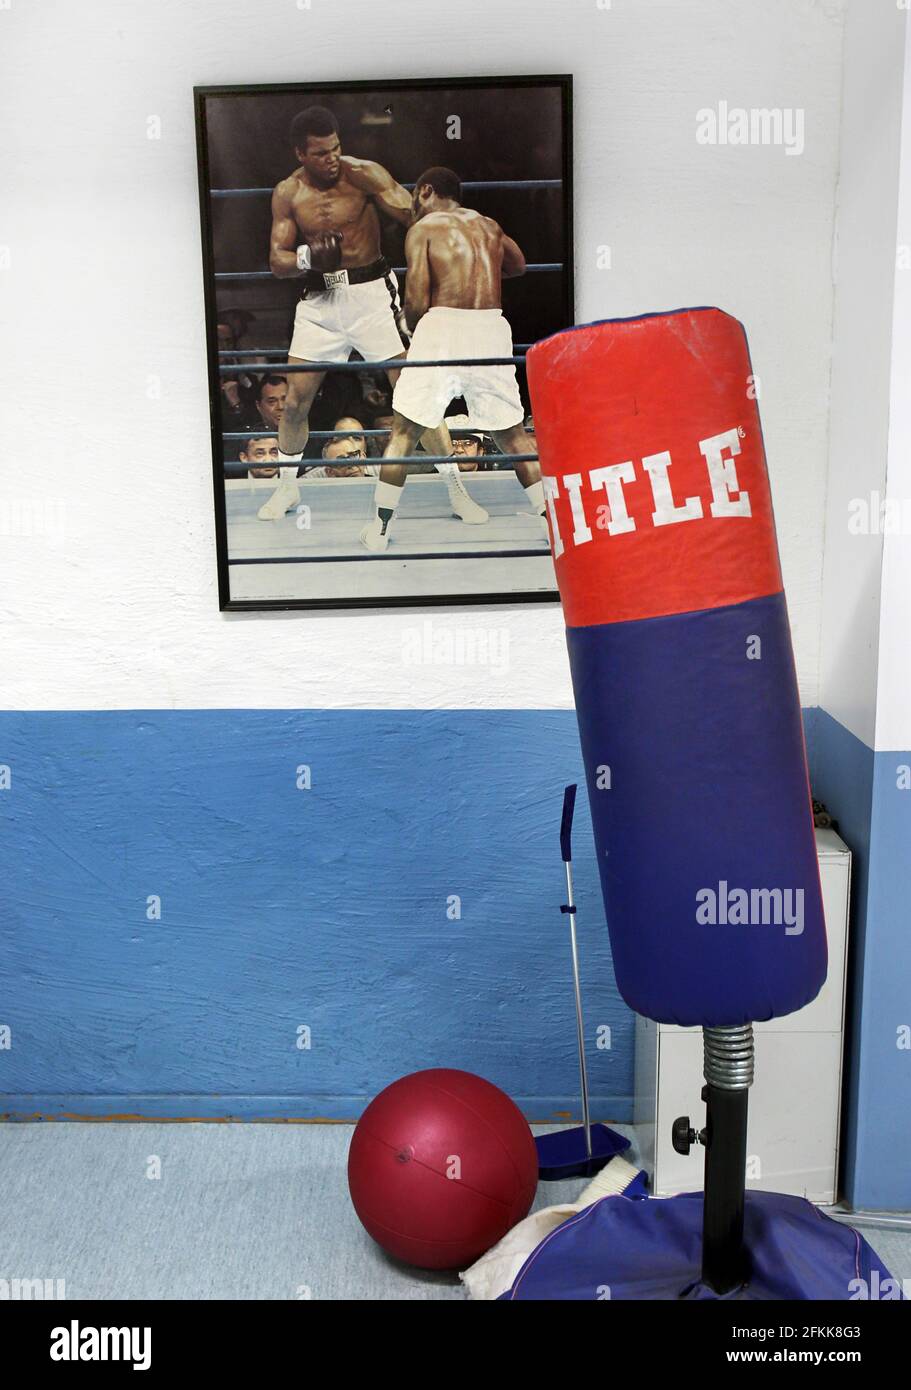 A sandbag in a boxing room Stock Photo - Alamy